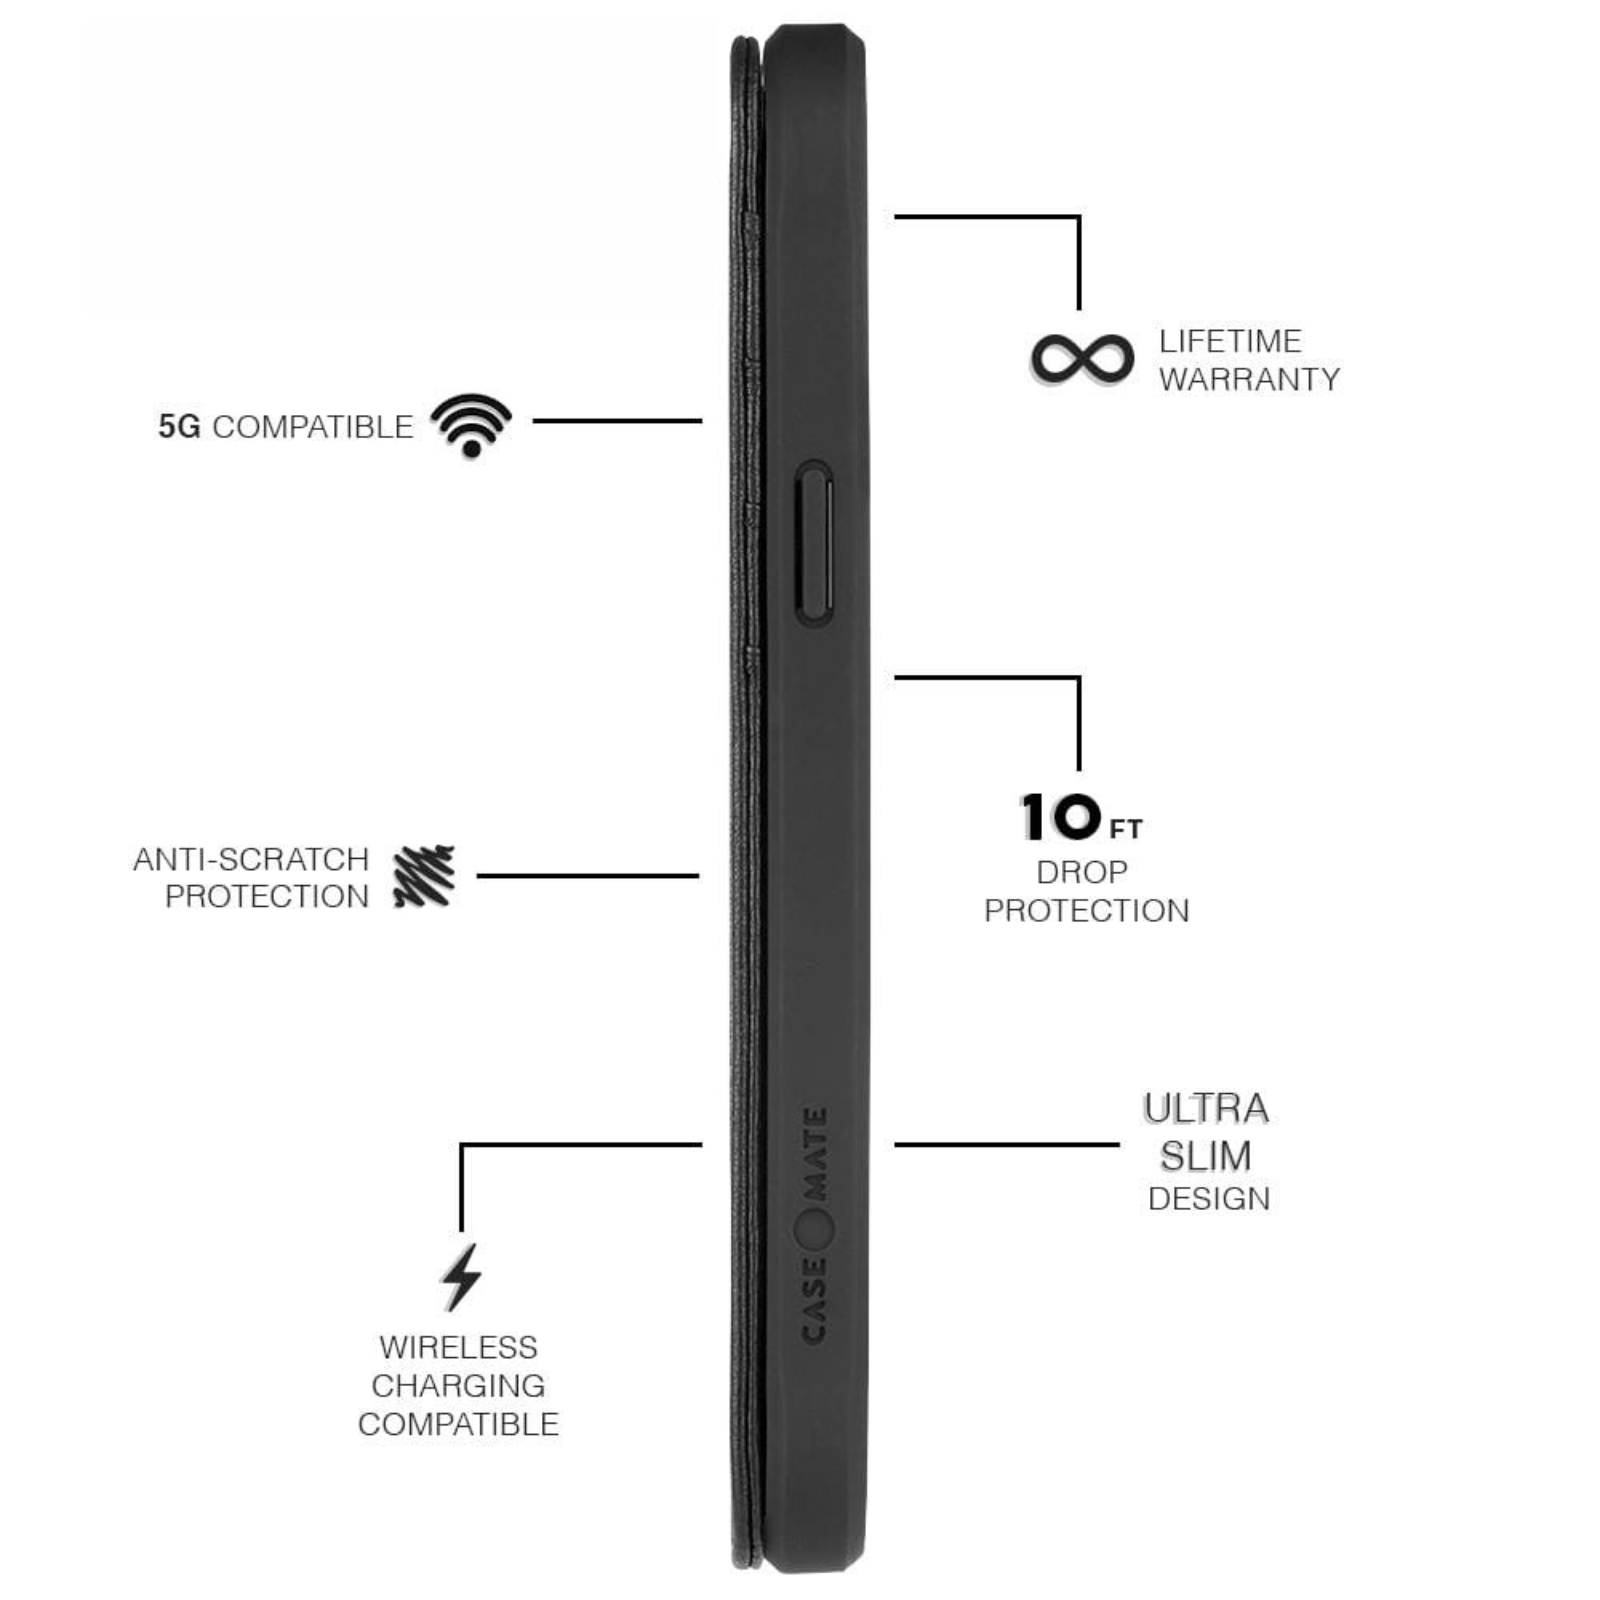 Features 5G Compatible, Anti-Scratch Protection, Wireless Charging Compatible, Lifetime Warranty, 10 ft Drop Protection, Ultra Slim design. color::Black